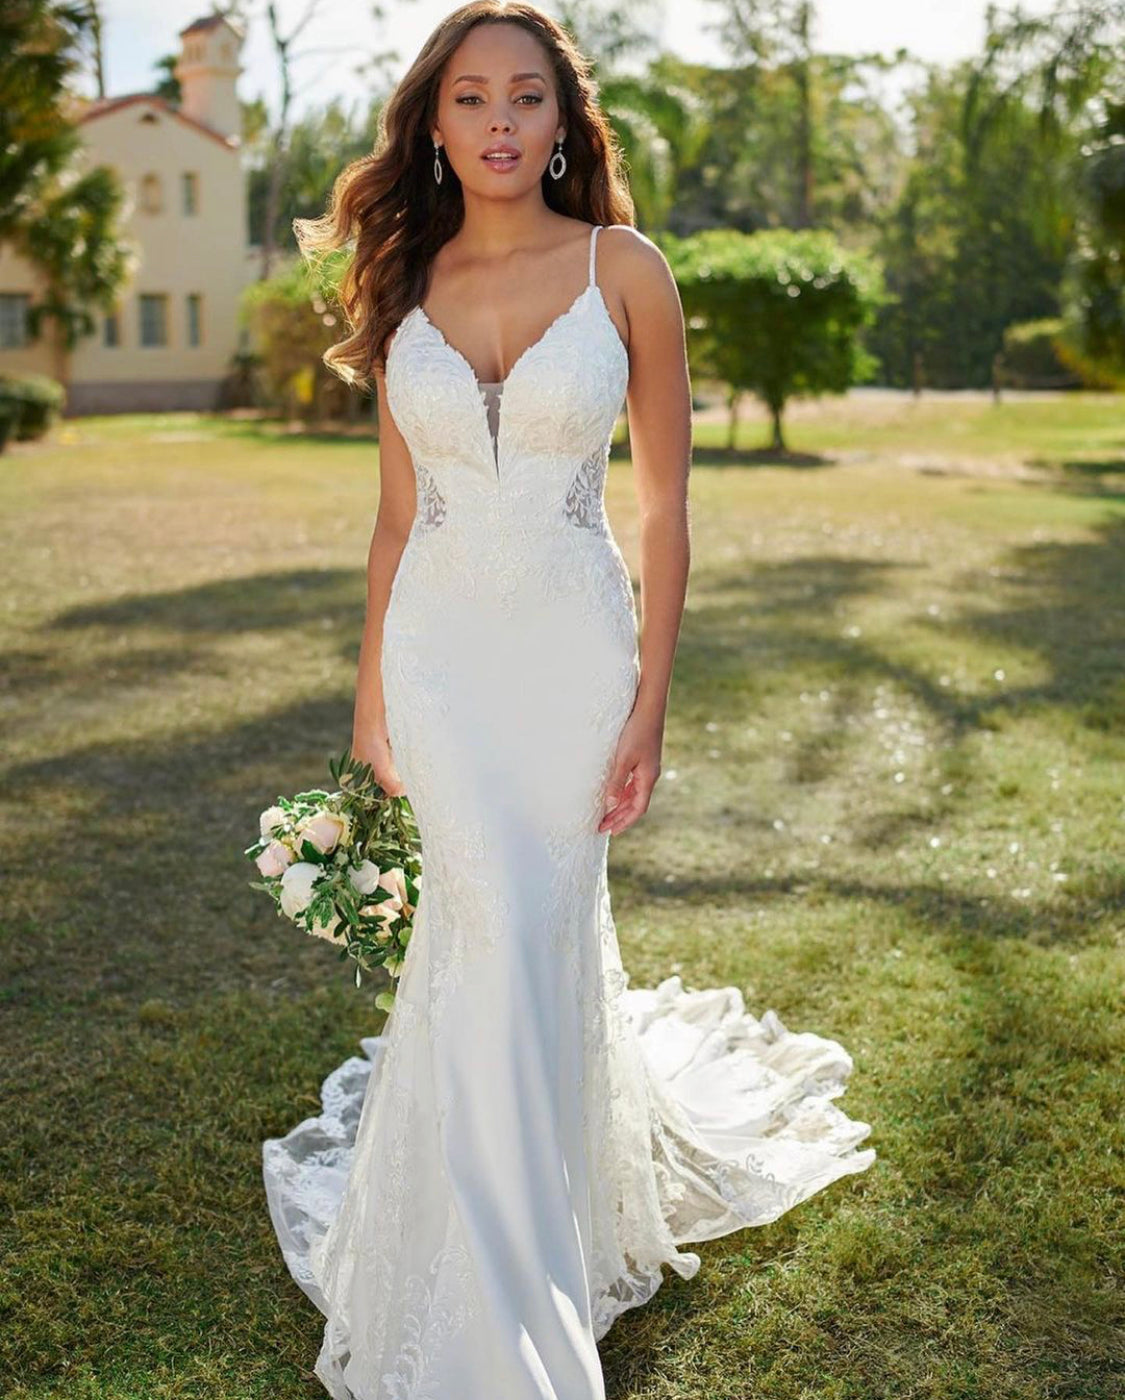 Lace Mermaid Wedding Dress with Spaghetti Straps and Flowing Train –  Heirloom Hourglass